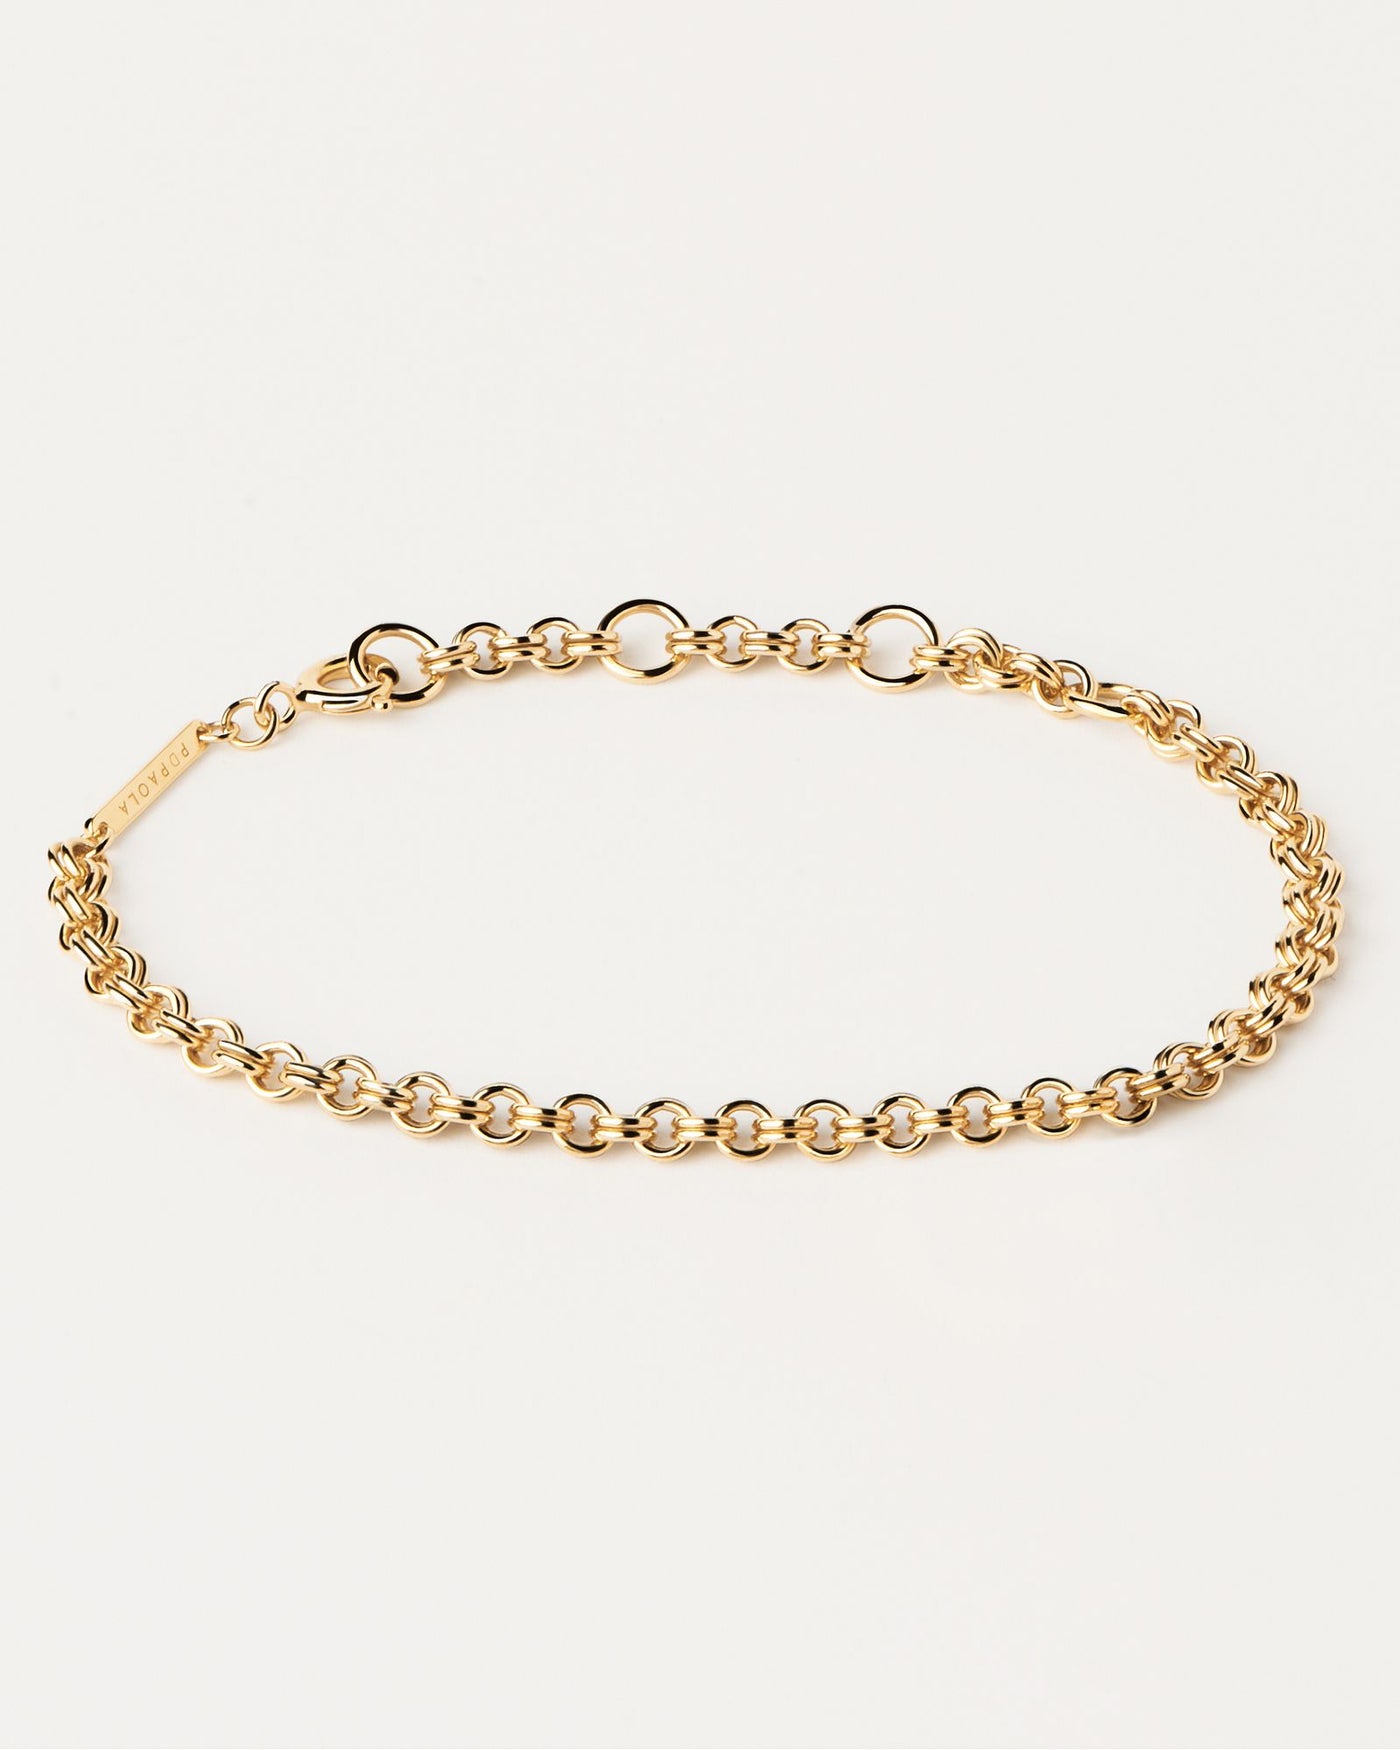 2024 Selection | Neo Bracelet. Gold-plated silver chain bracelet with double cable links. Get the latest arrival from PDPAOLA. Place your order safely and get this Best Seller. Free Shipping.